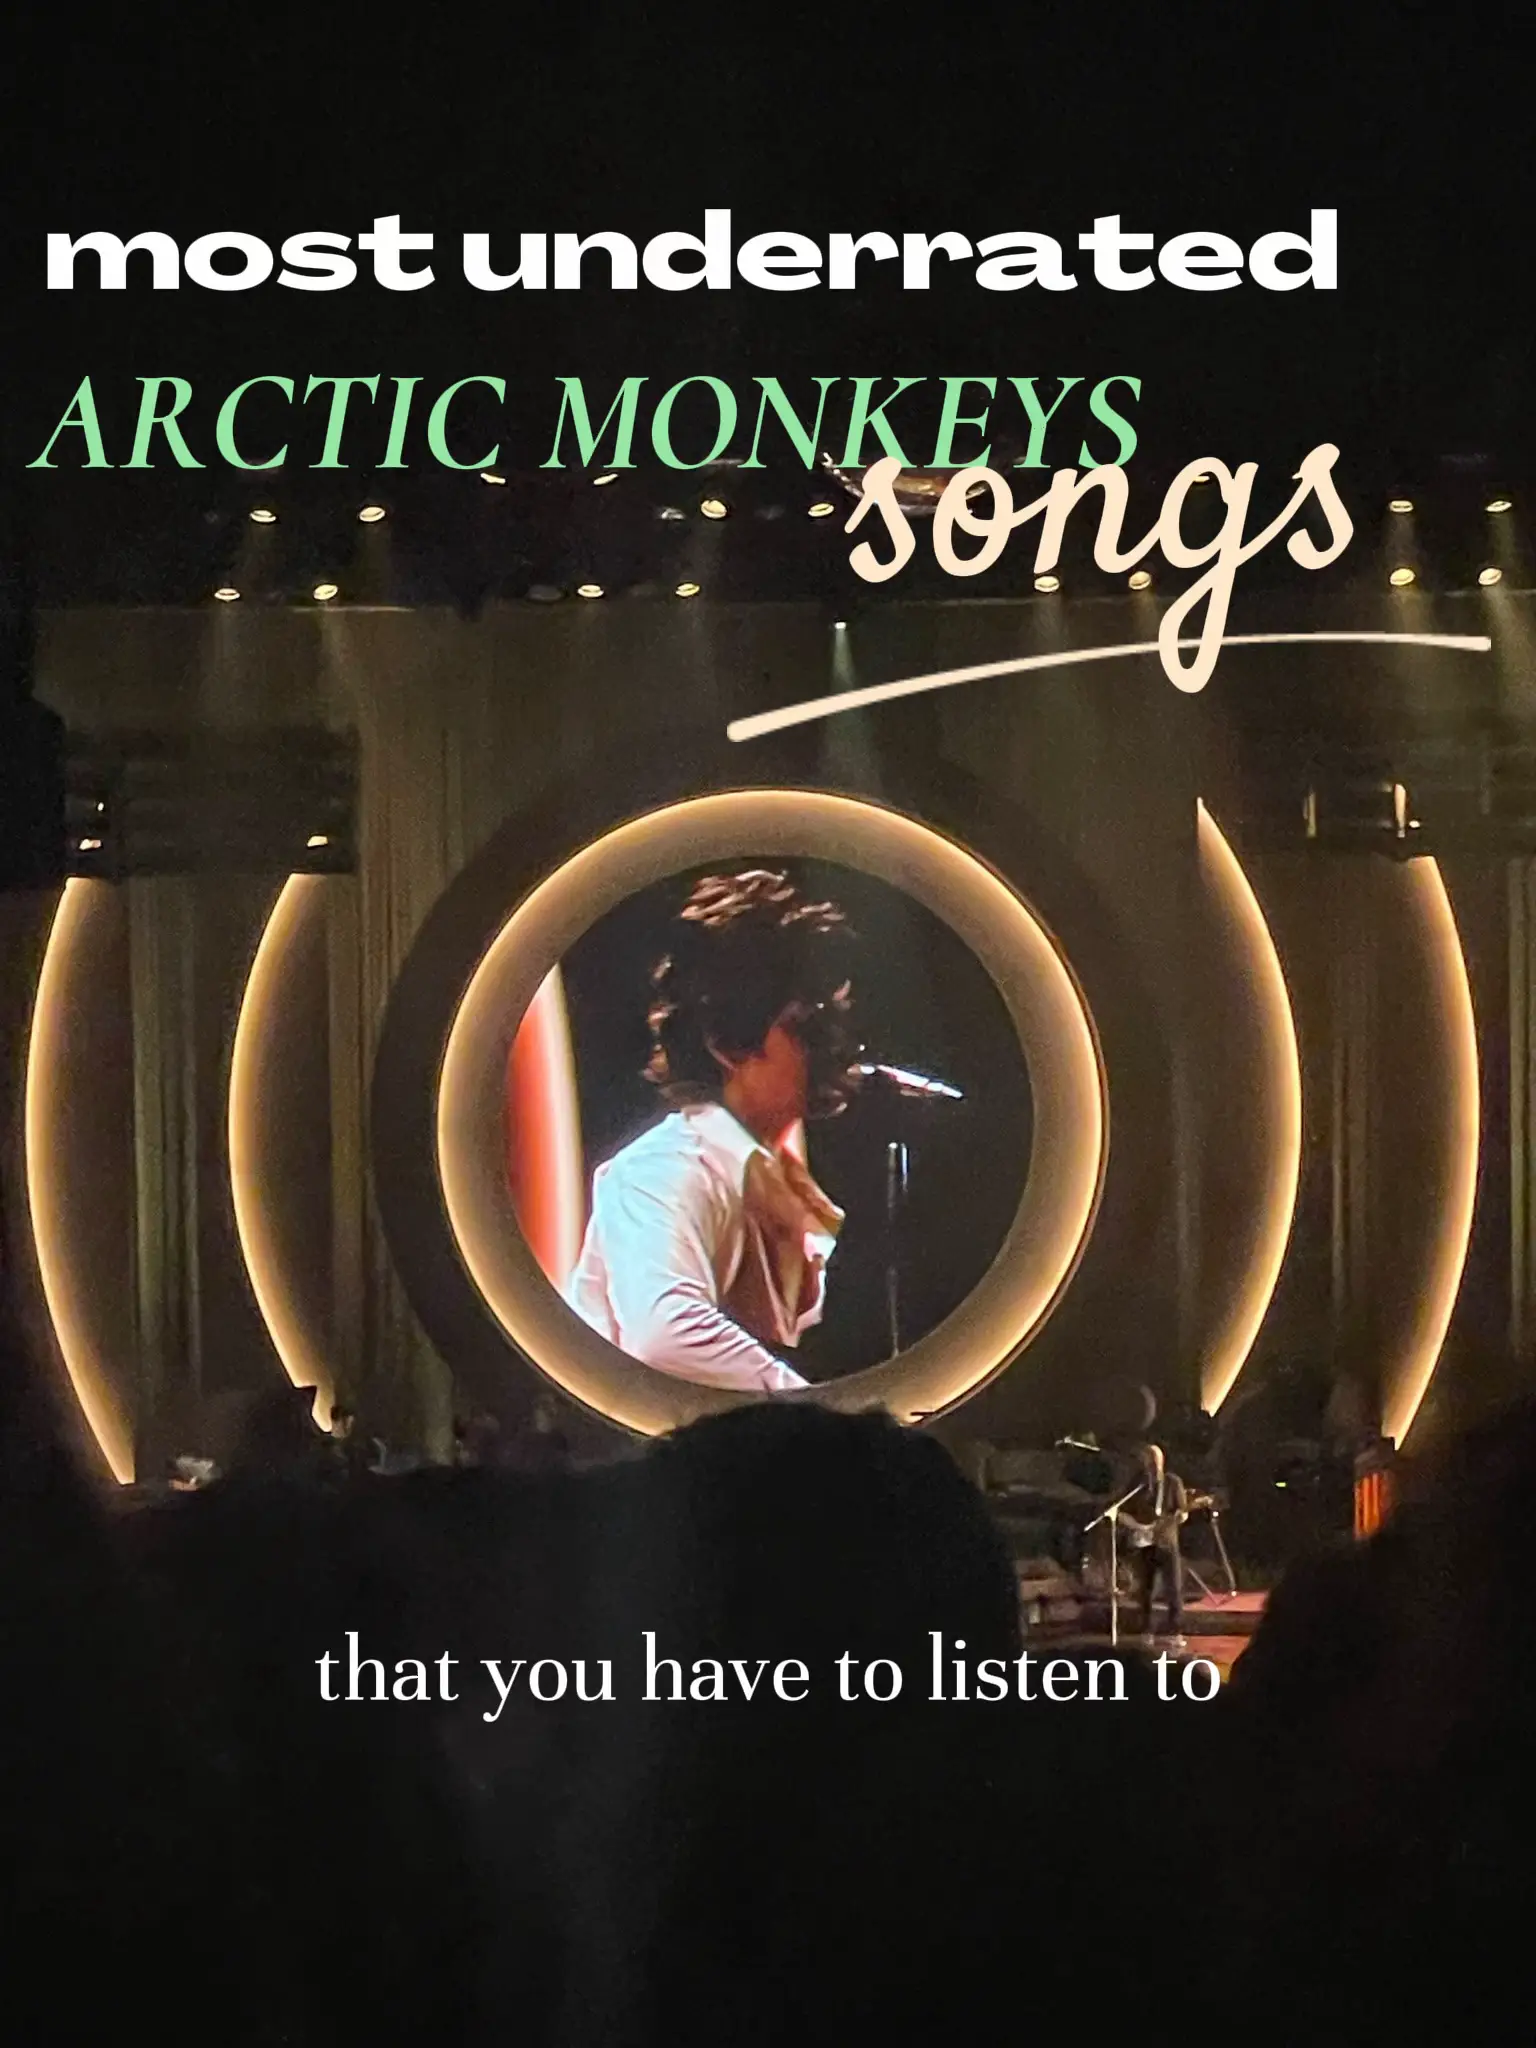 The Arctic Monkeys take their fans for a ride